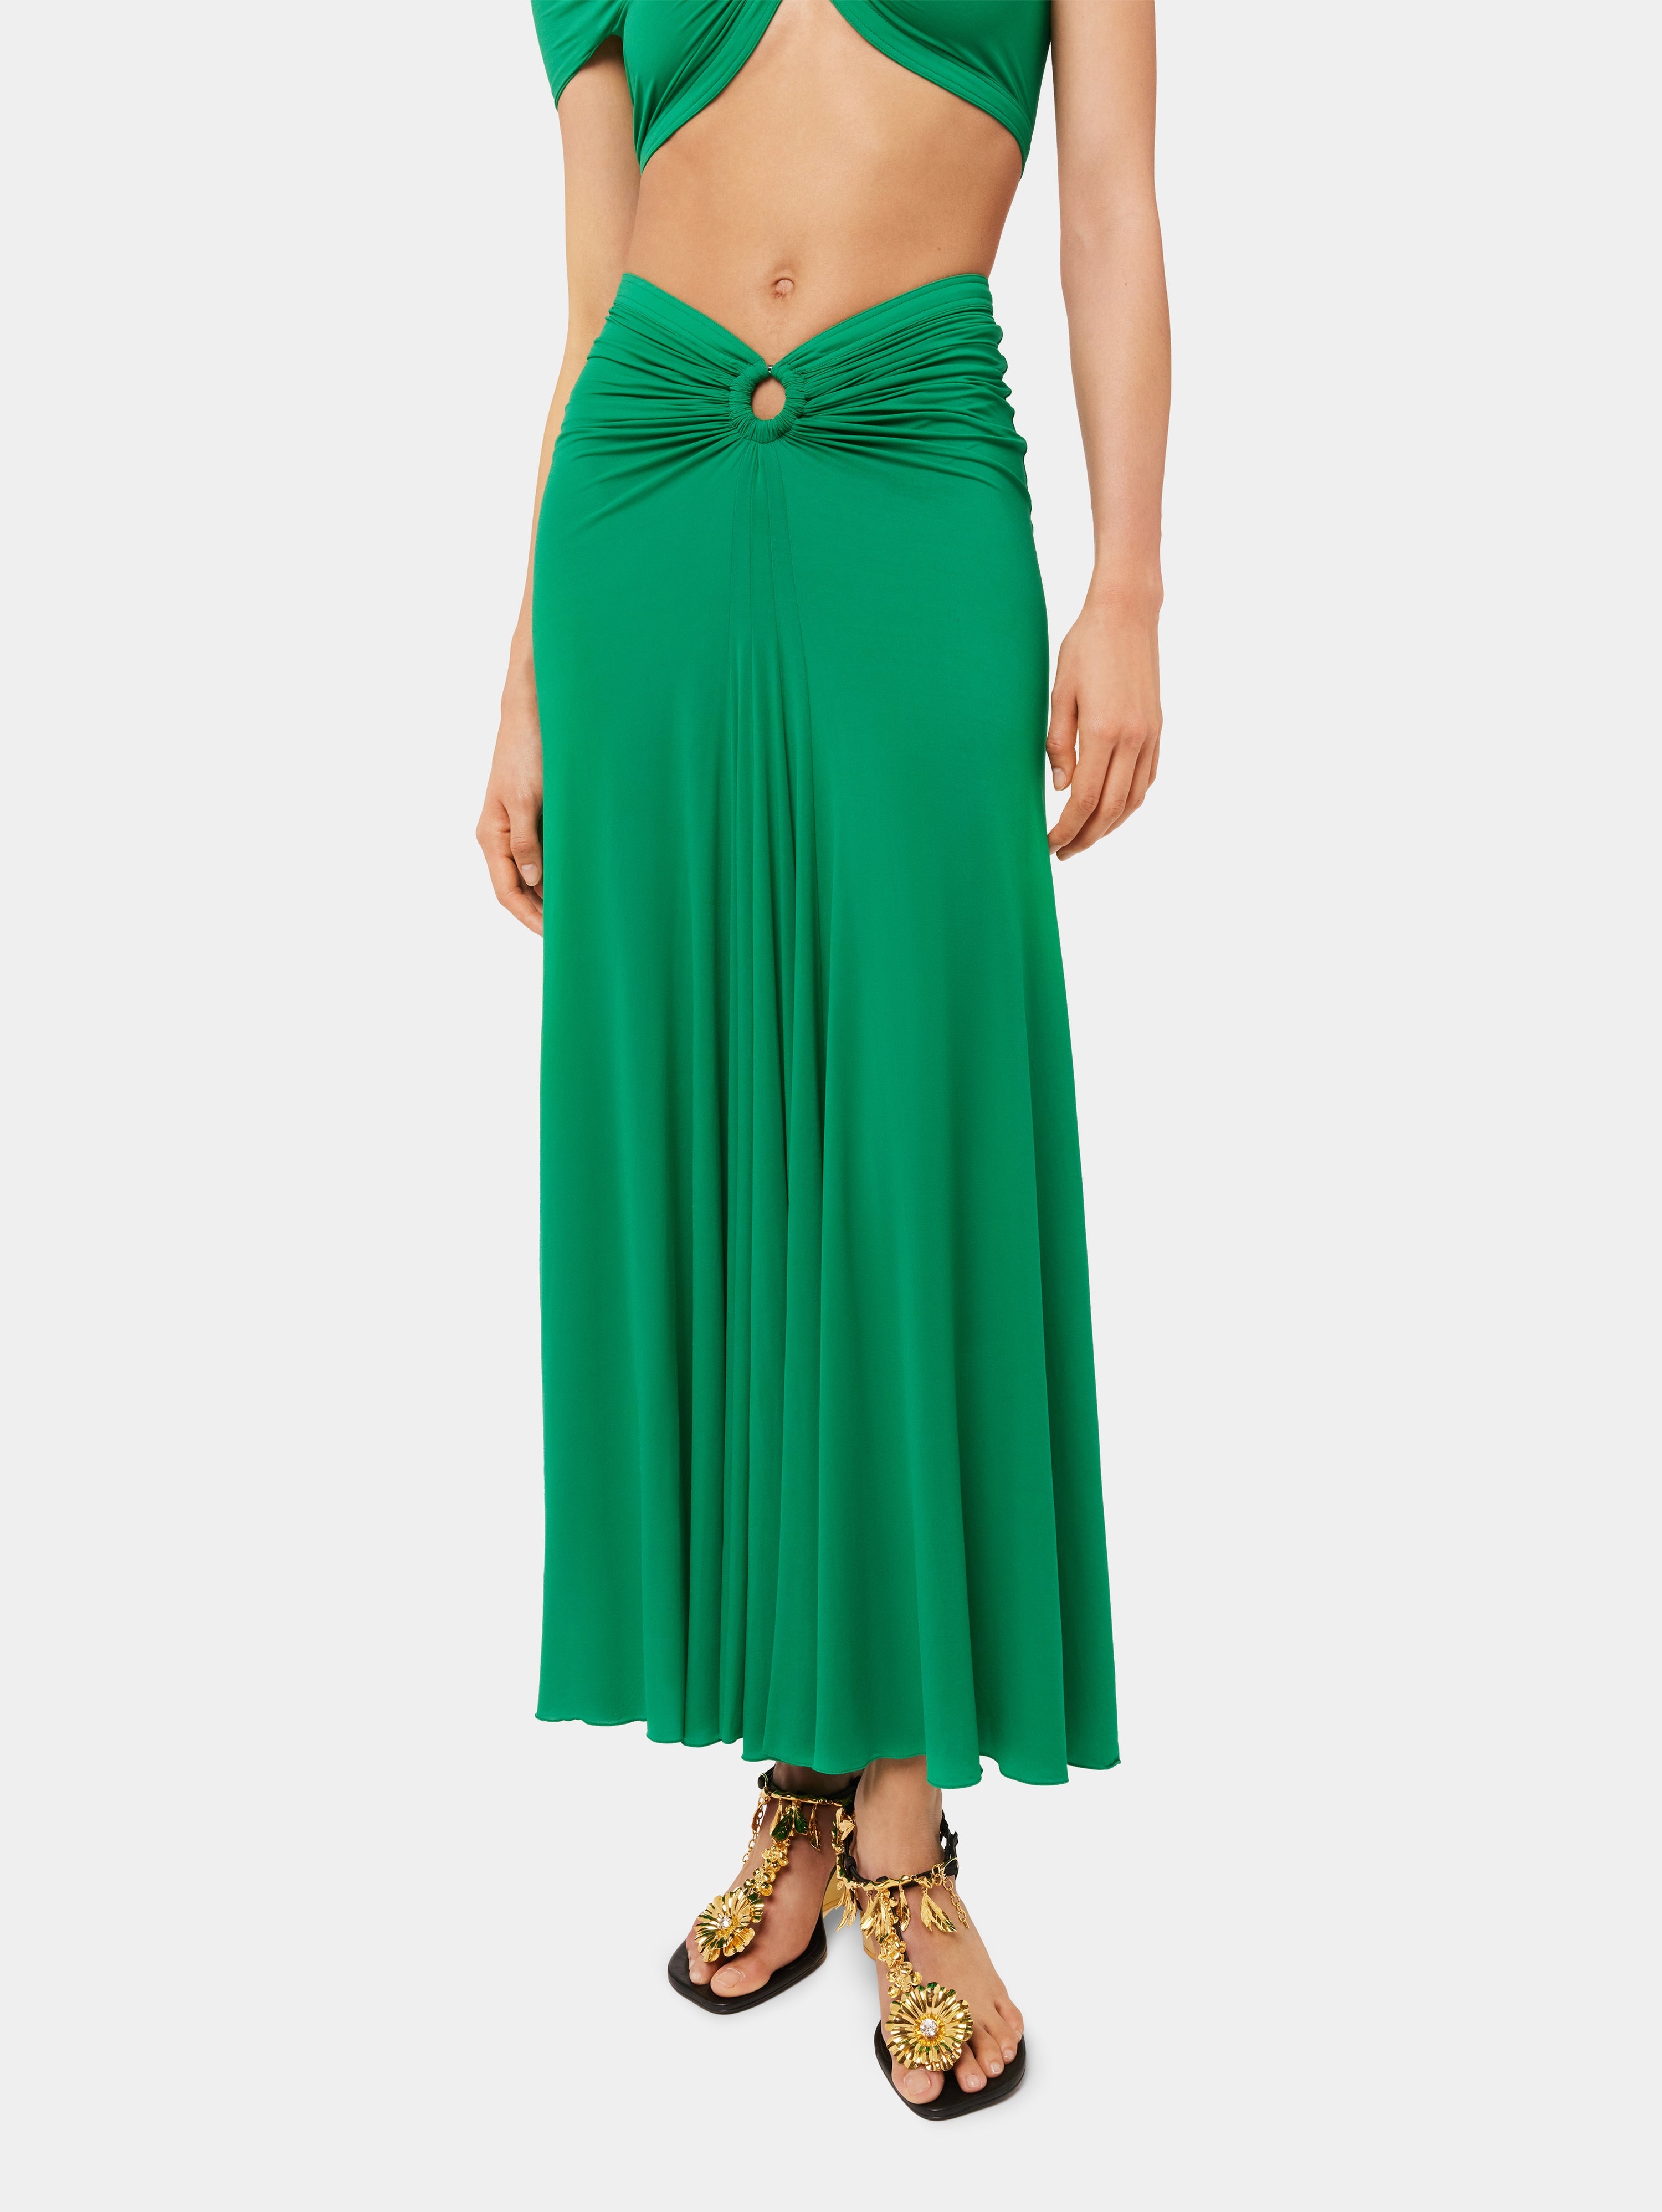 GREEN FLARED DRAPED SKIRT IN JERSEY - 4